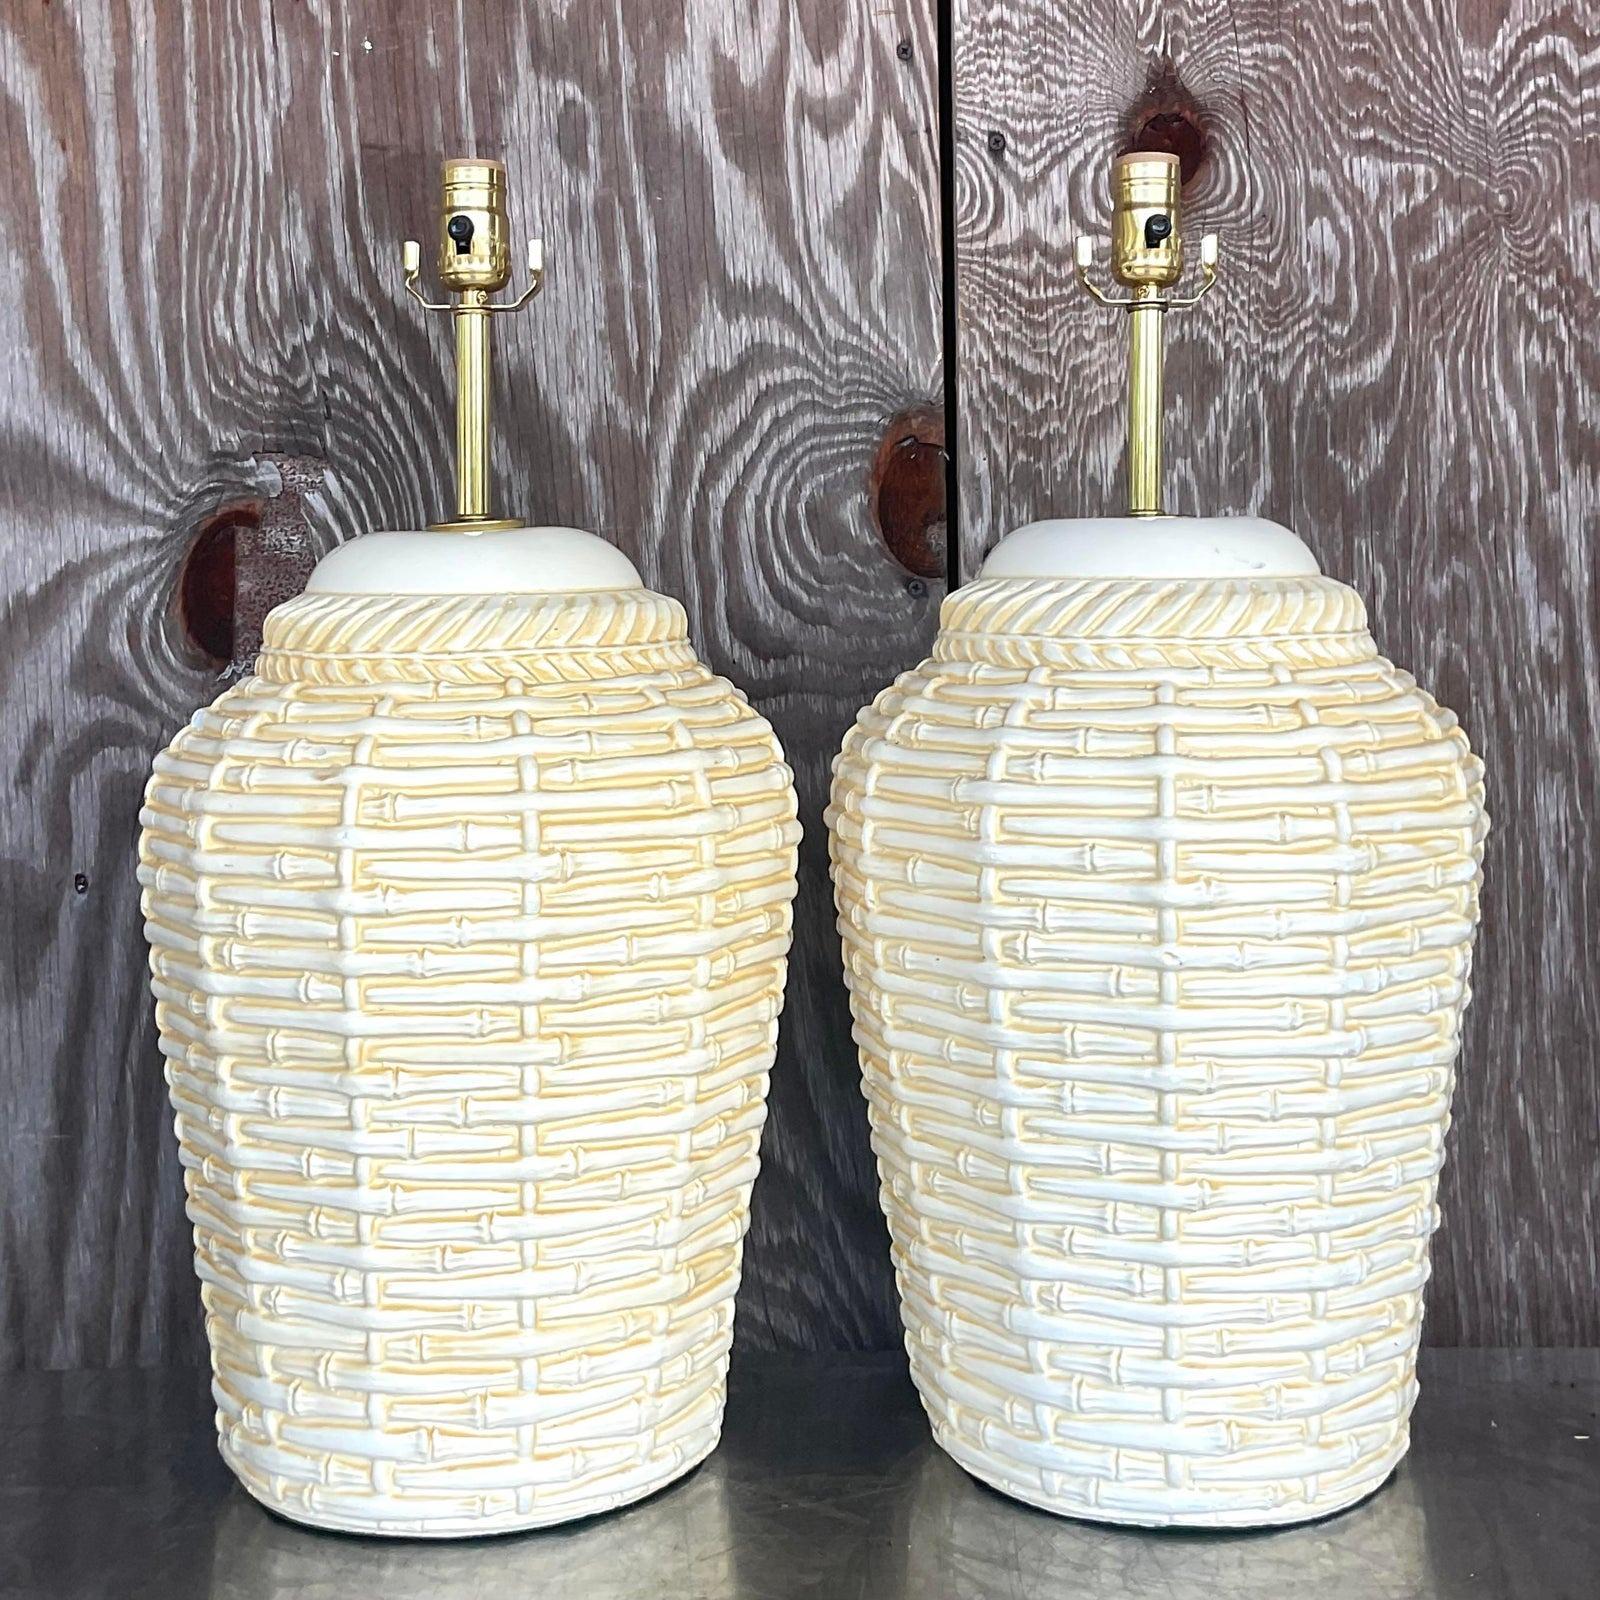 A fabulous pair of vintage Coastal table lamps. A chic matte glazed ceramic finish with a classic basket design. Fully restored with all new wiring and hardware. Acquired from a Palm Beach estate.